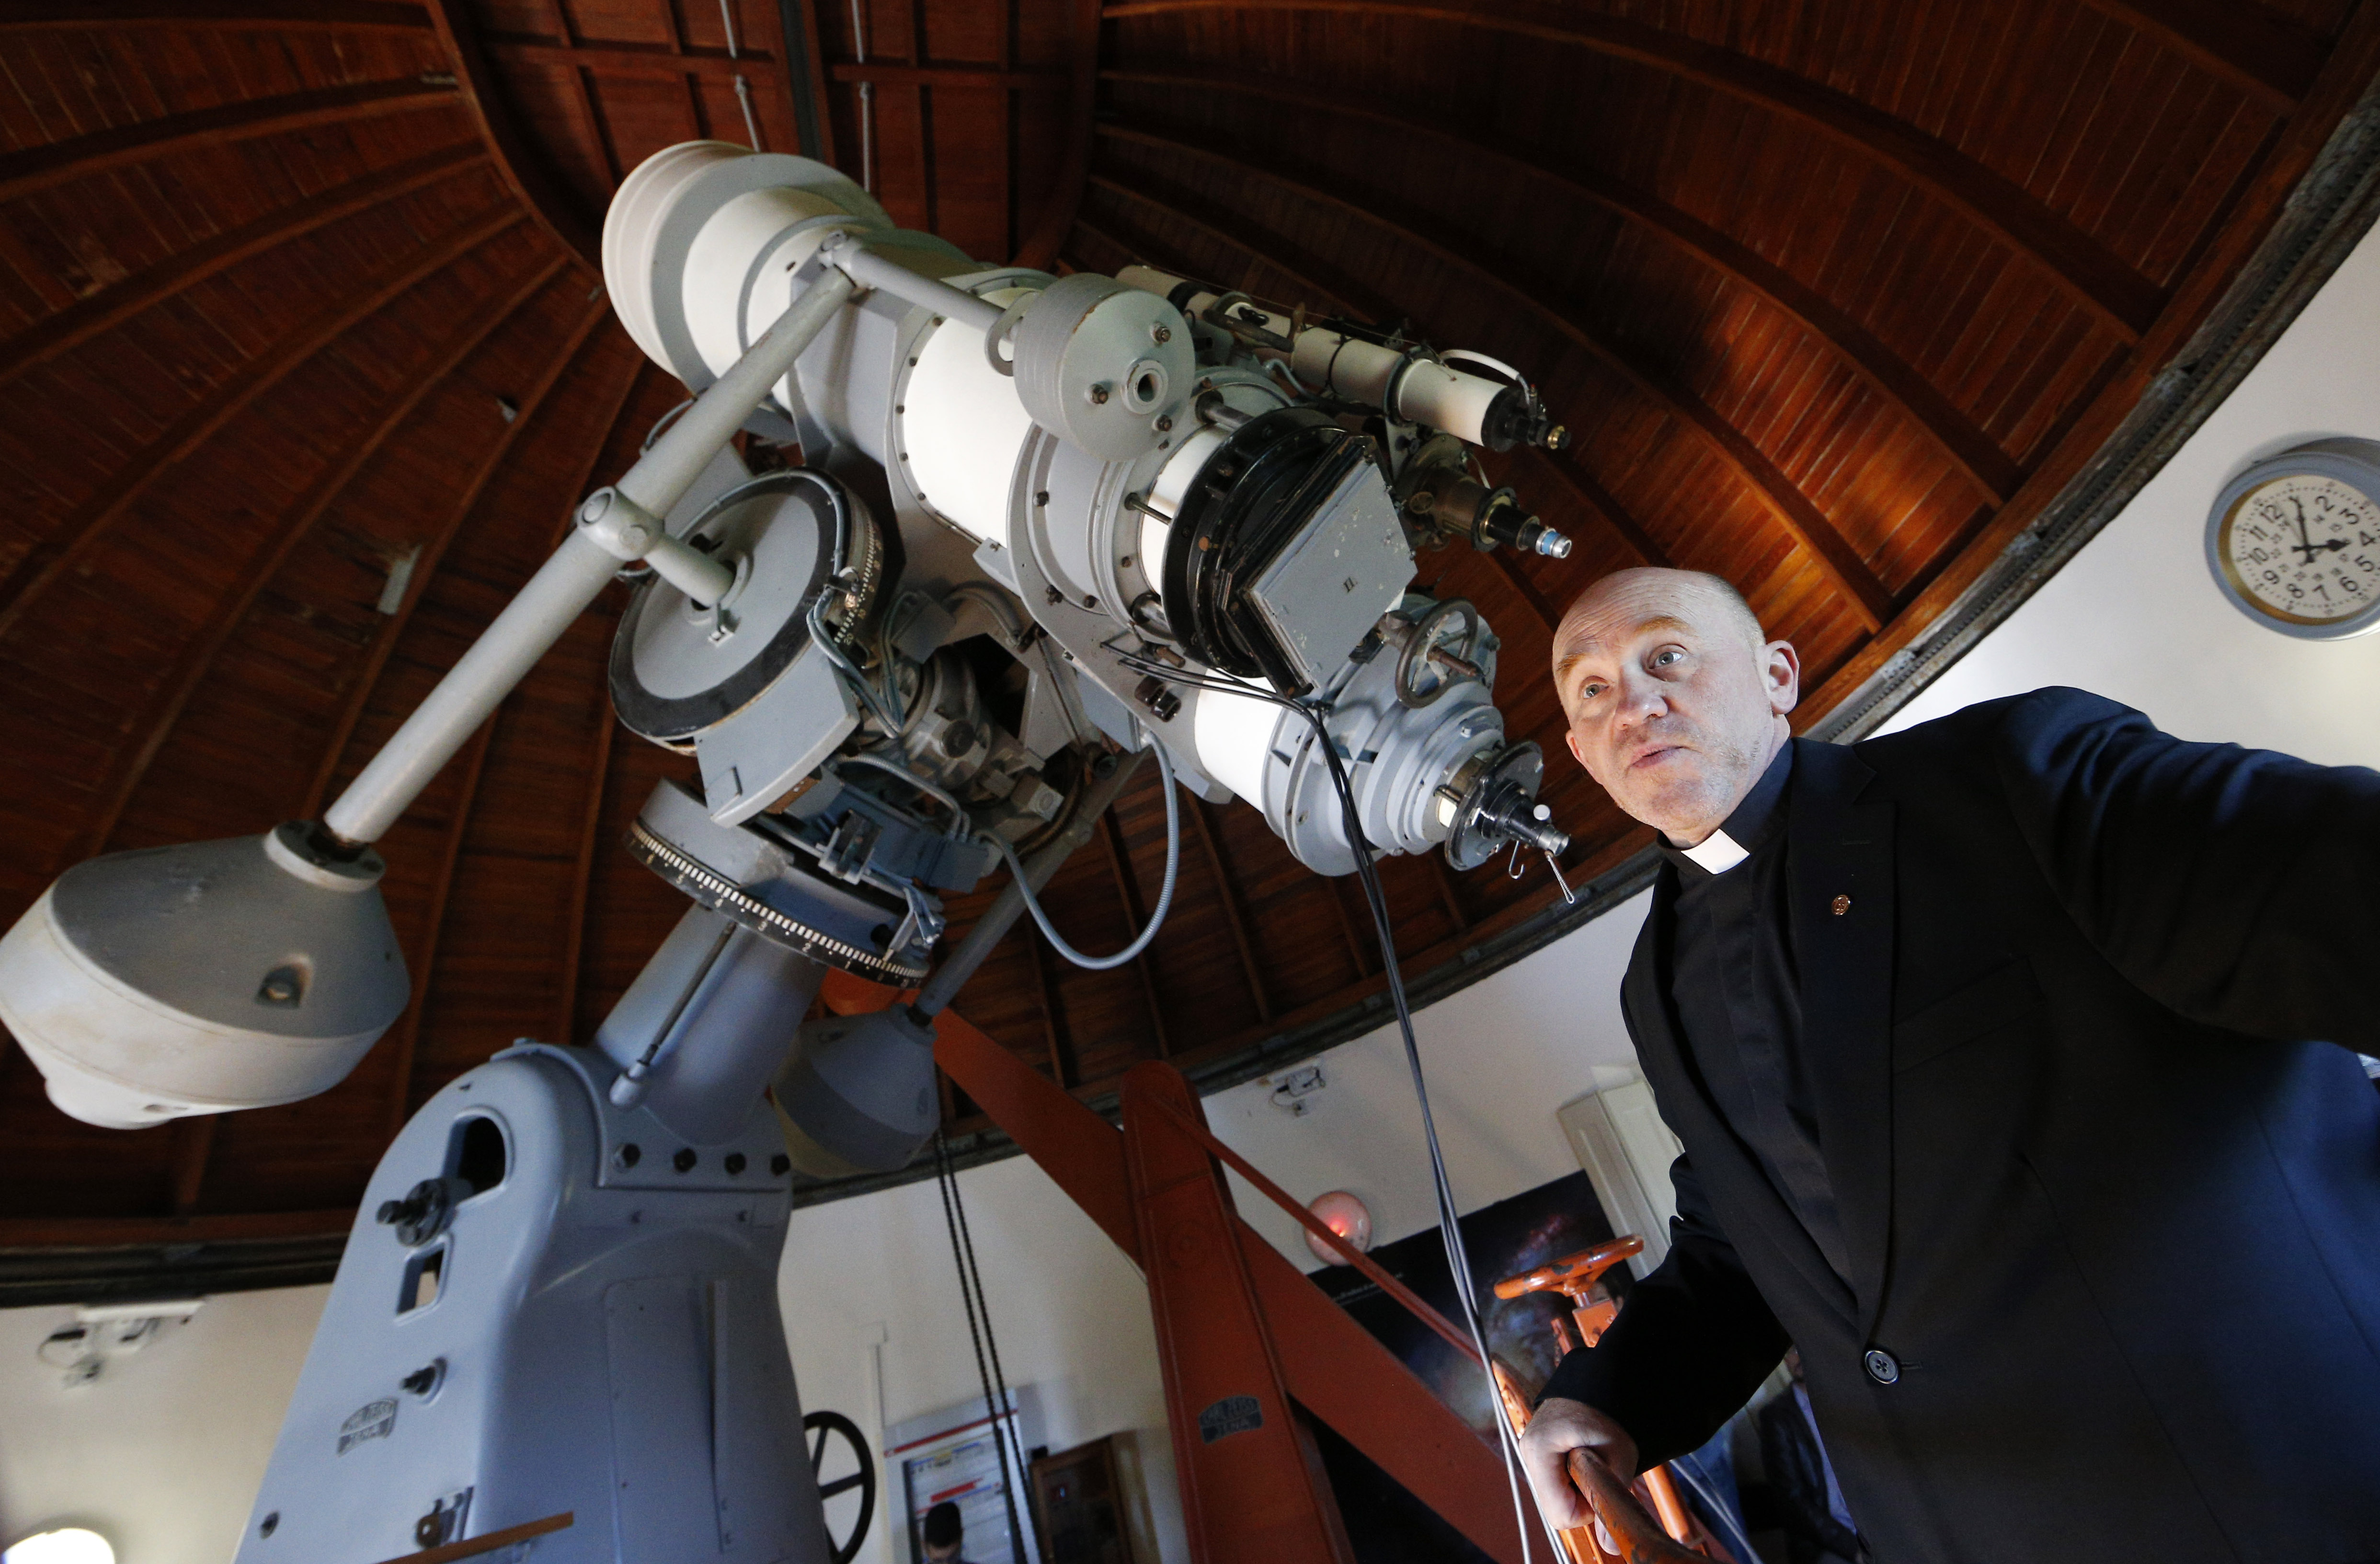 can you visit the vatican observatory